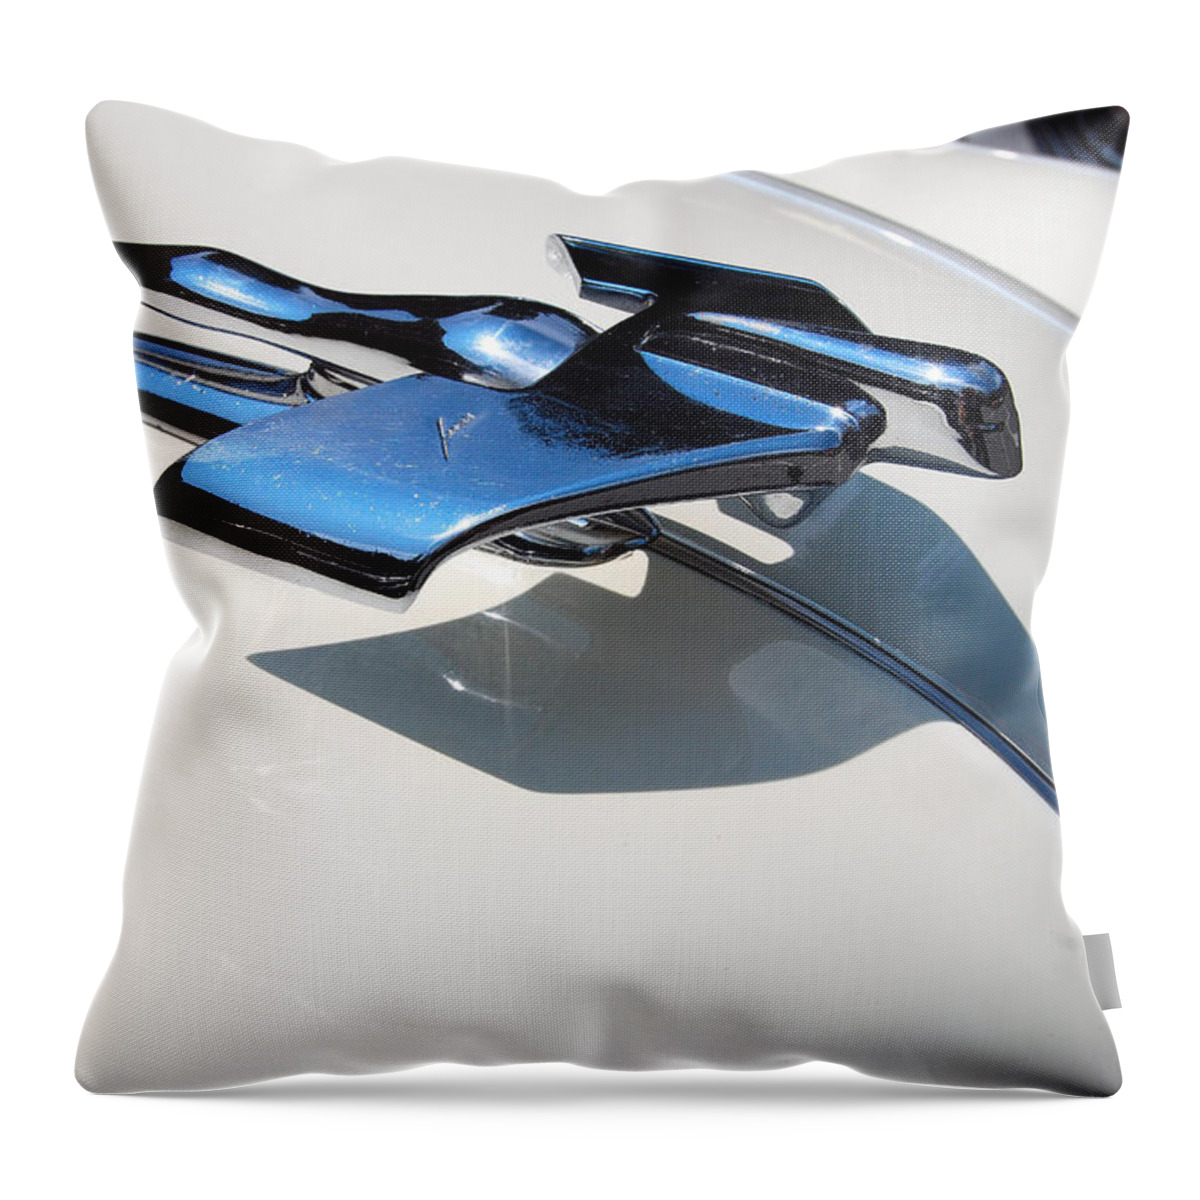 Automobiles Throw Pillow featuring the photograph Airflyte by John Schneider